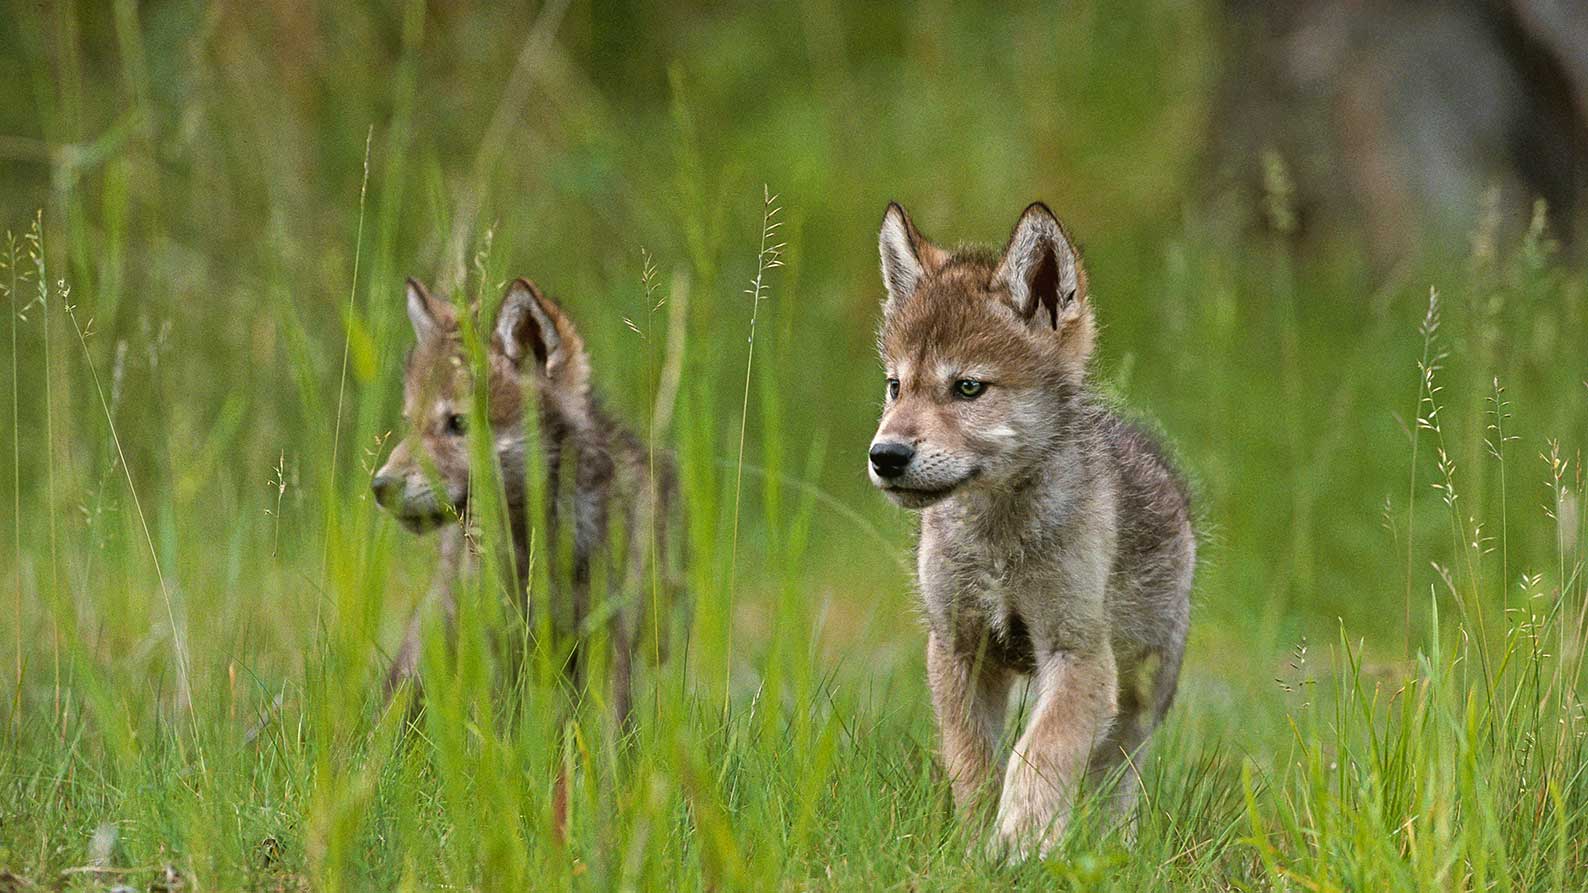 DID YOU KNOW? Wolves only have one litter of pups annually.